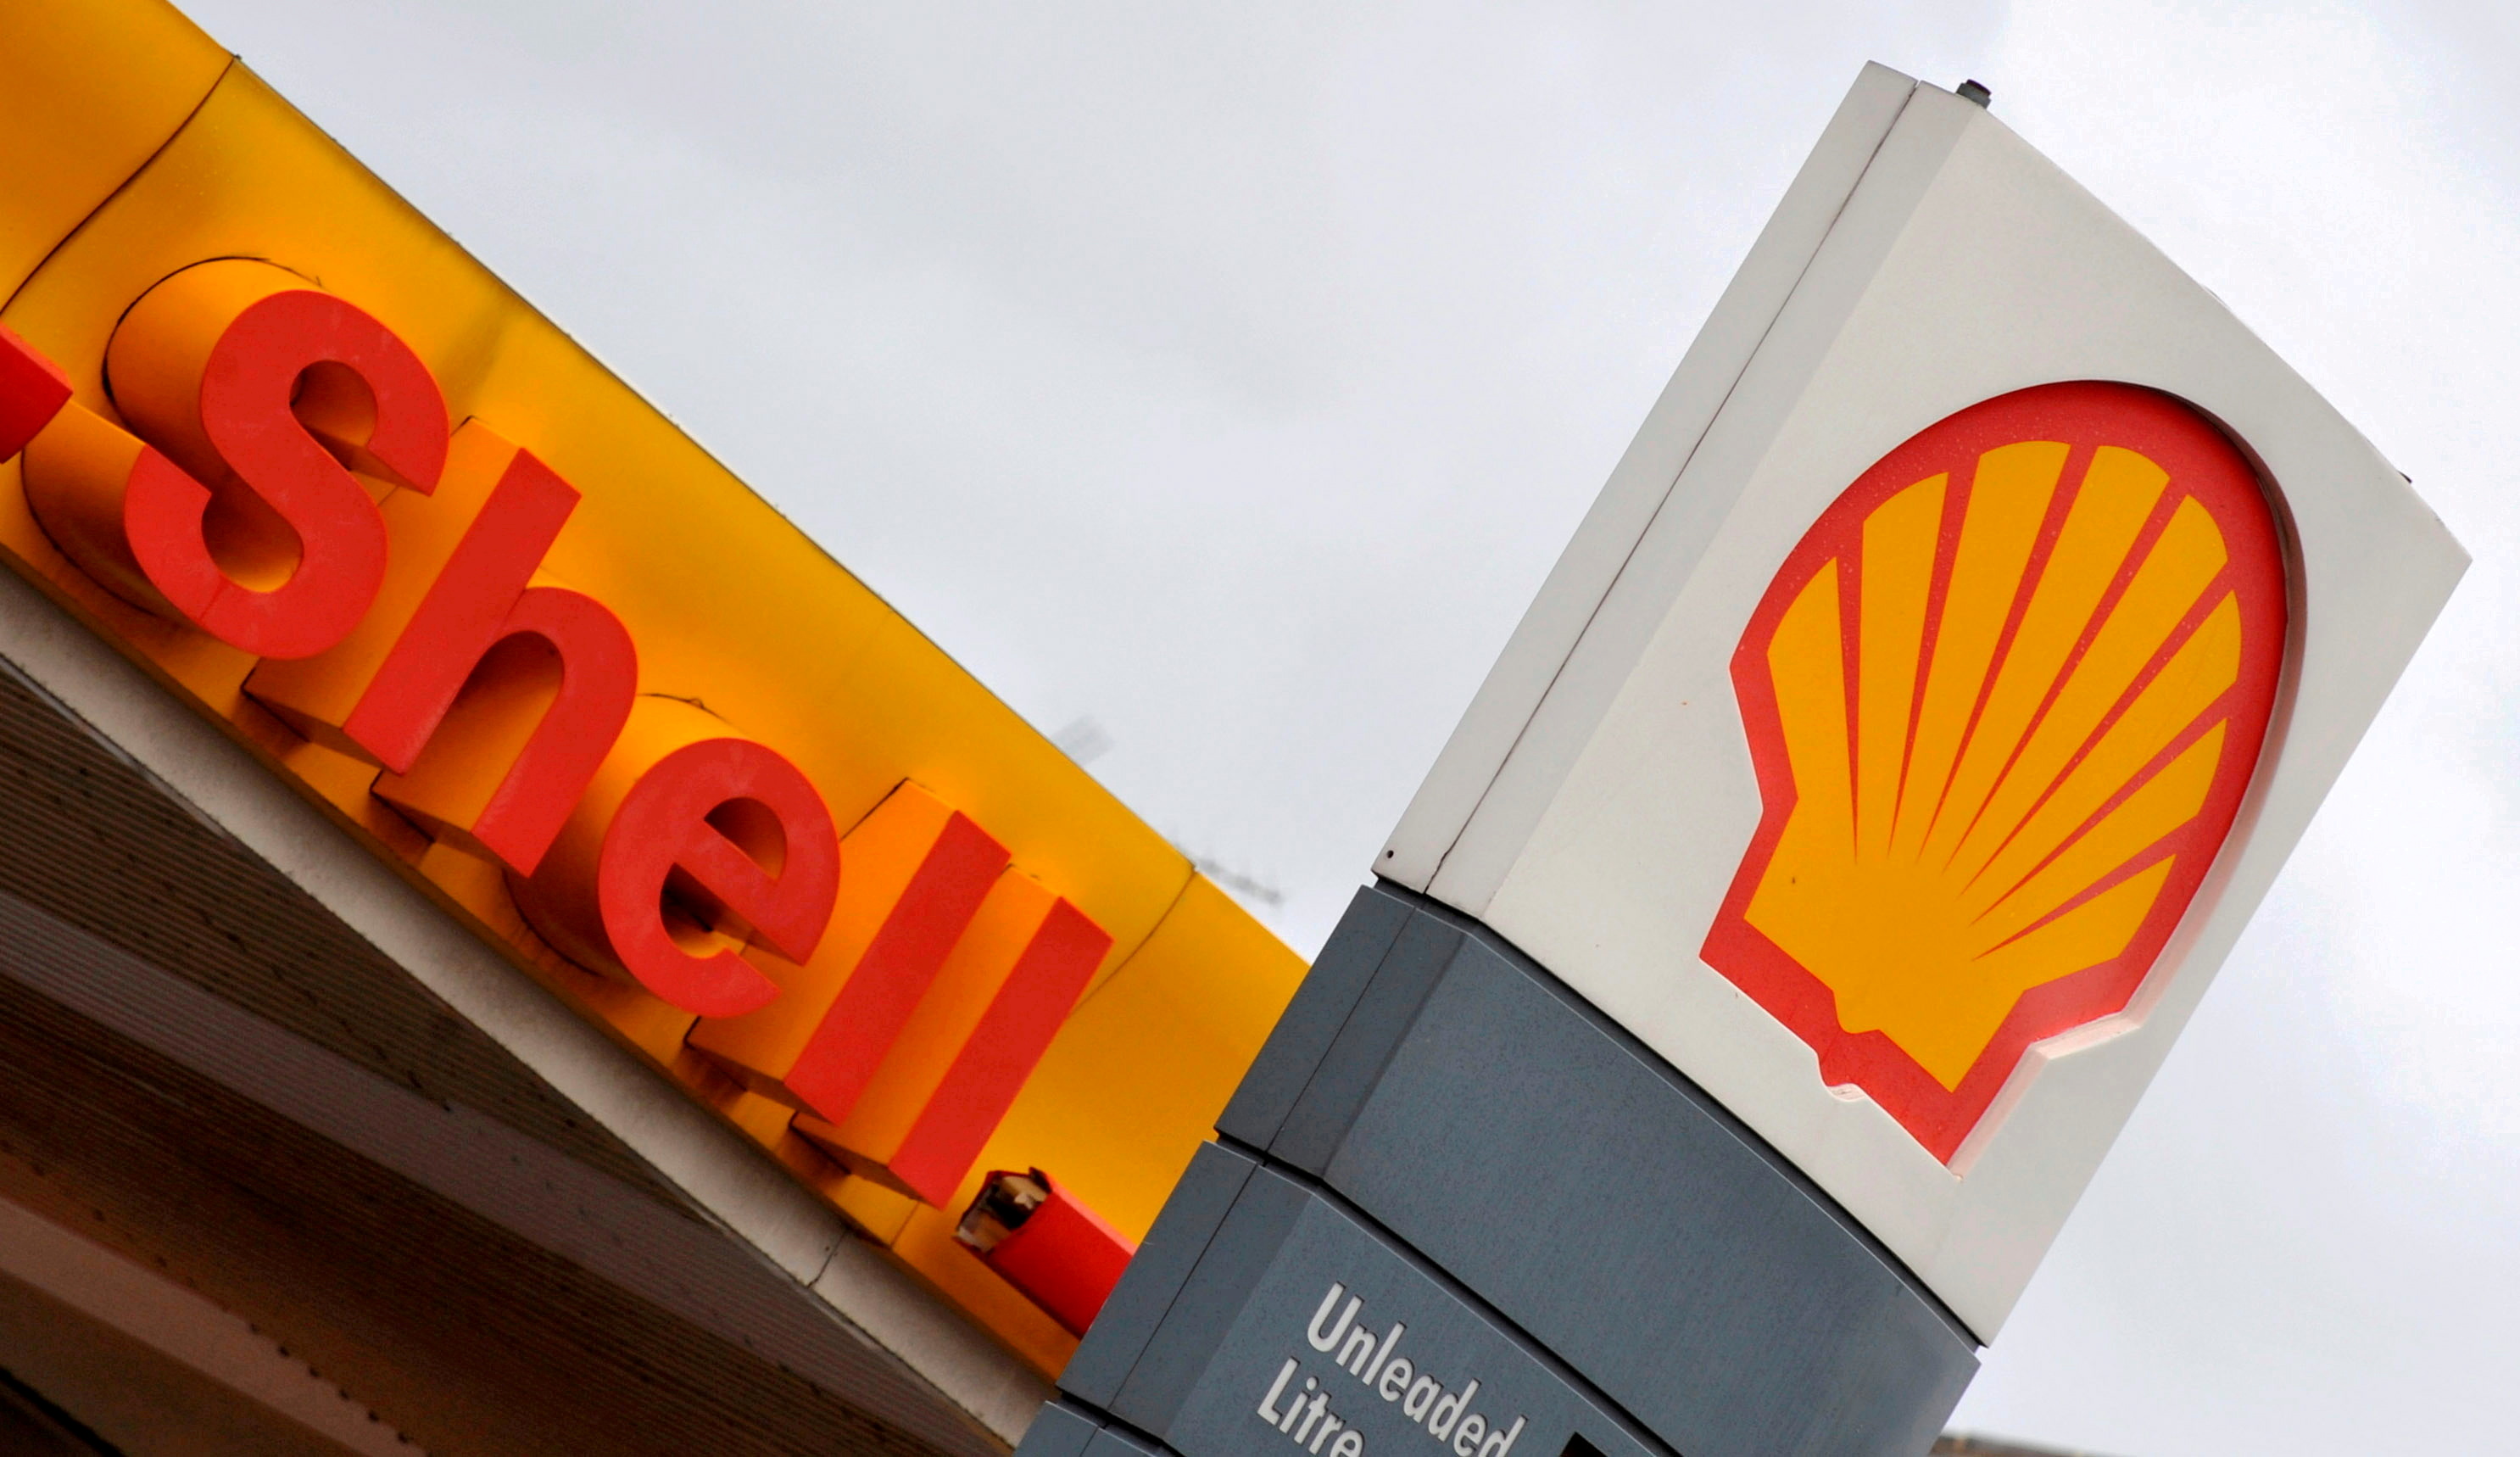 The Royal Dutch Shell logo is seen at a Shell petrol station in London, Britain, January 31, 2008. REUTERS/Toby Melville